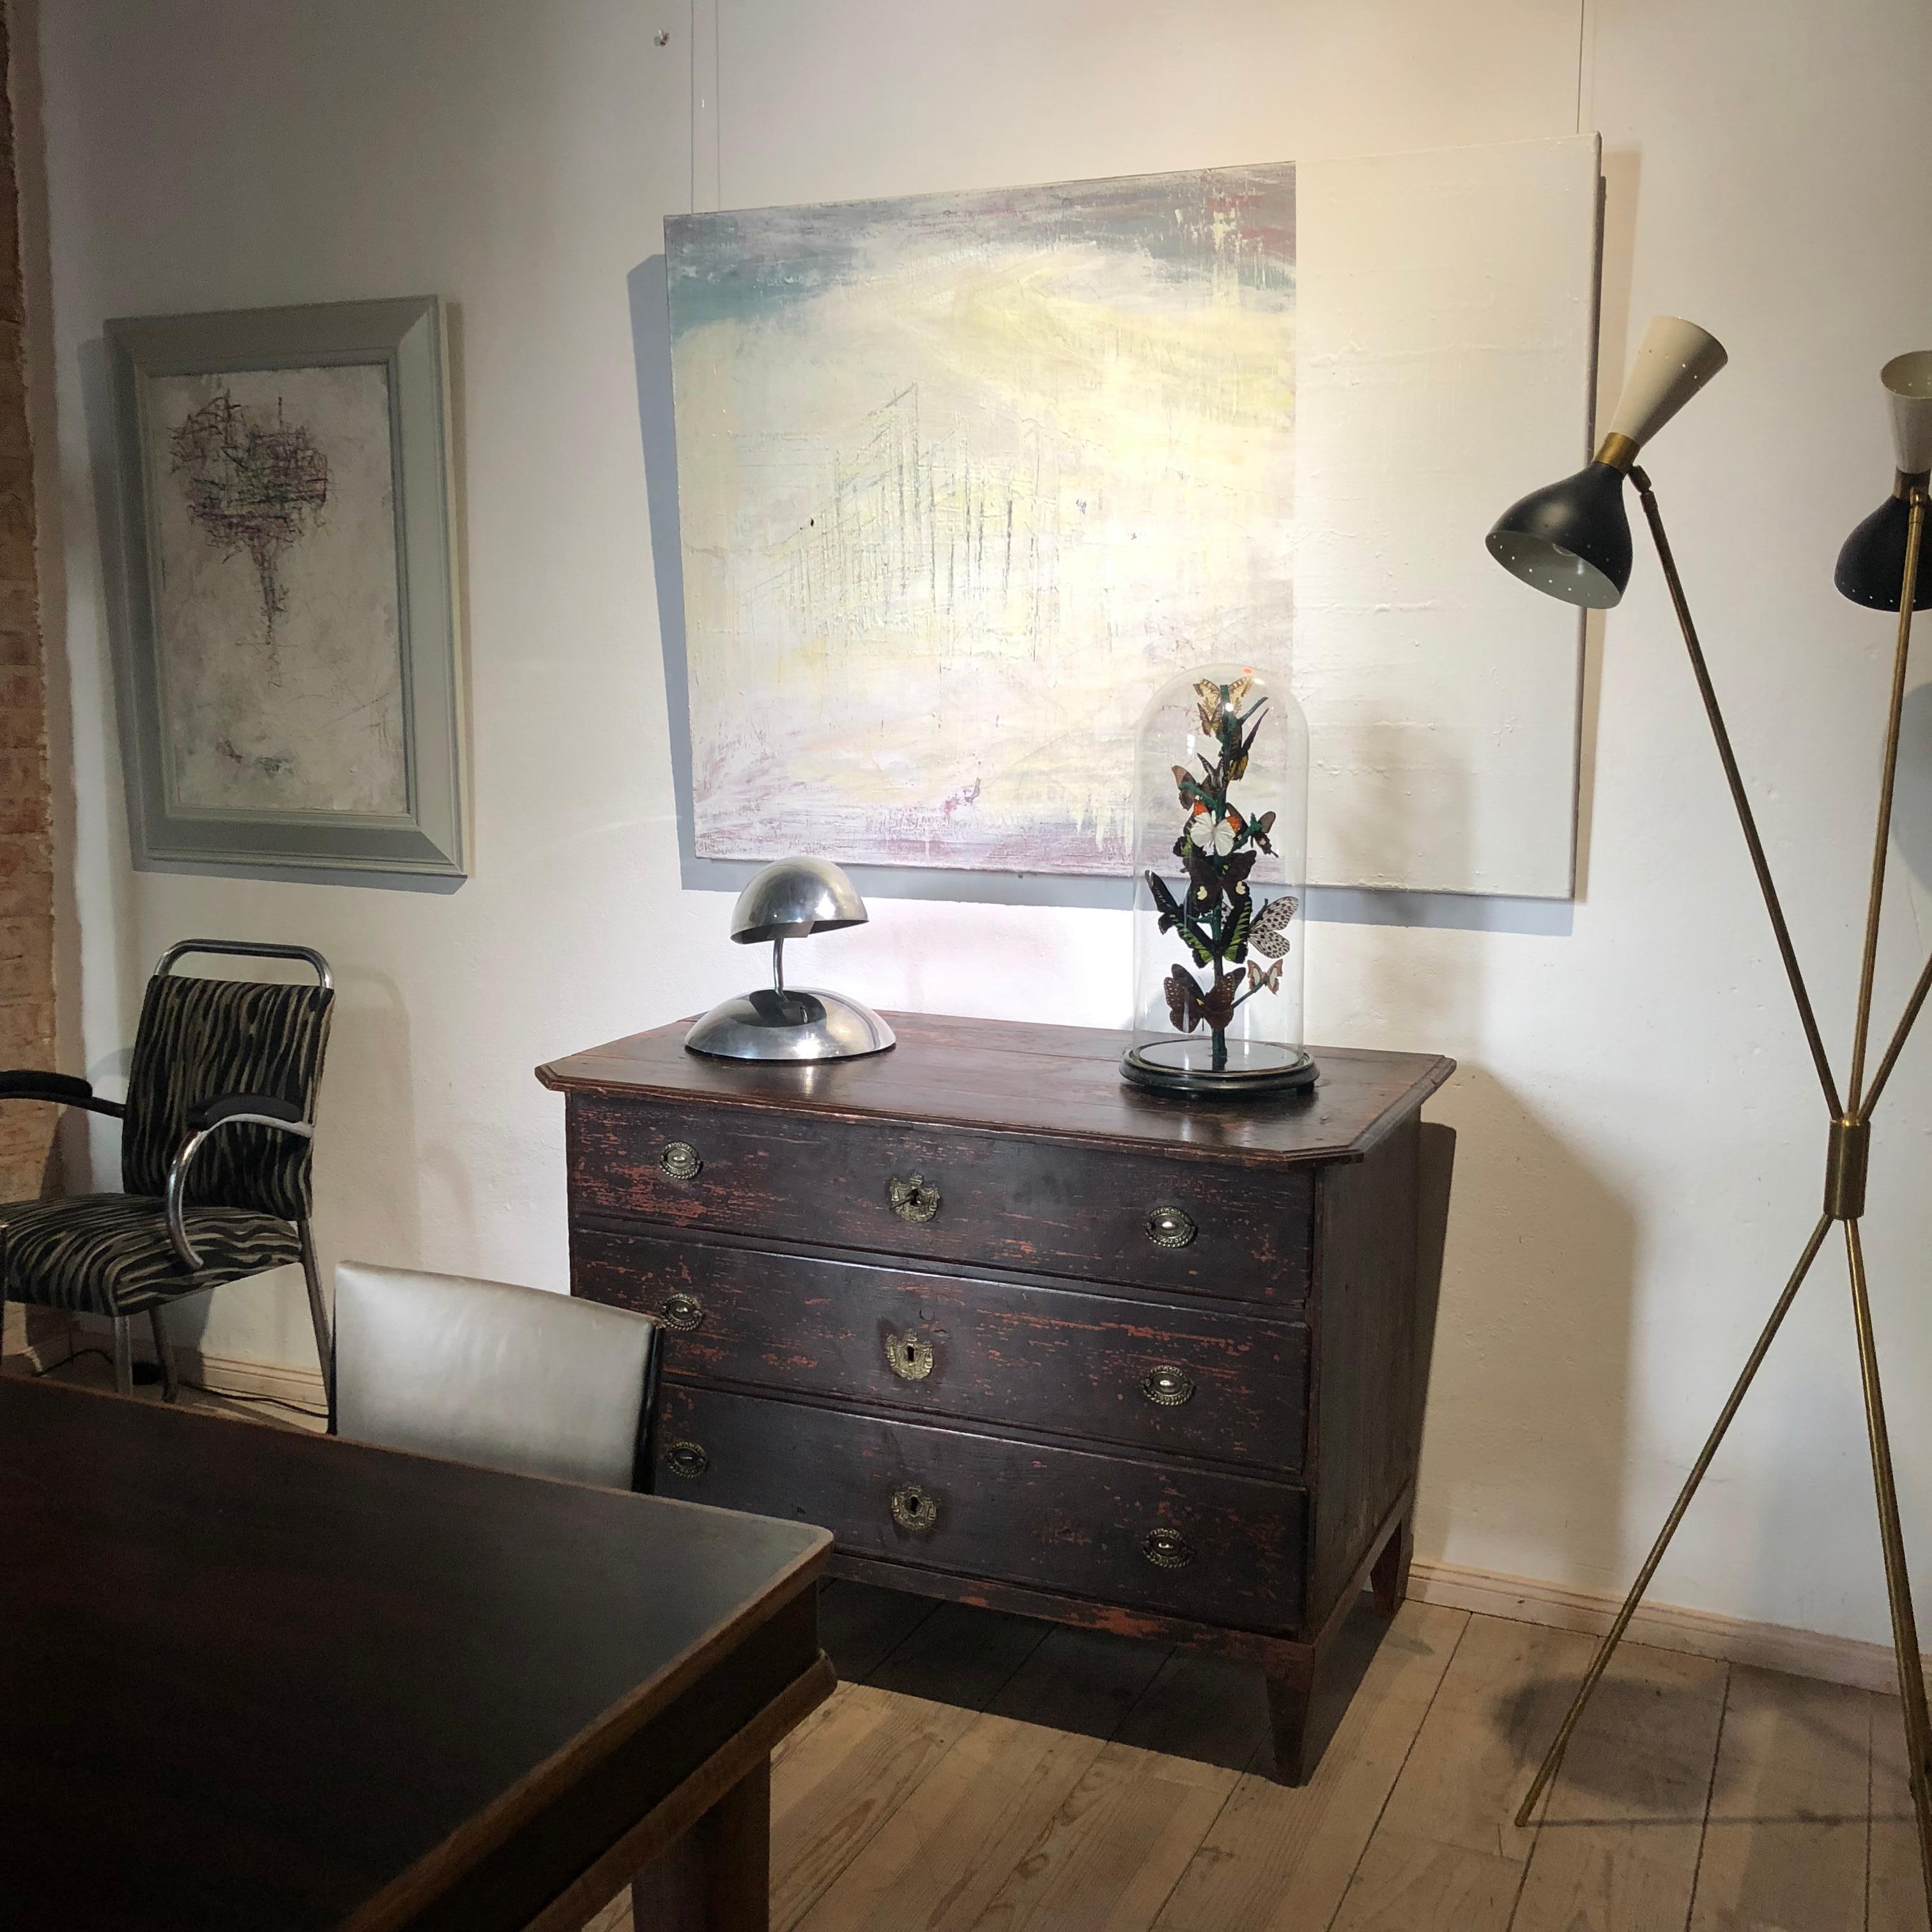 This floor lamp from Italy in the style of Stilnovo is in excellent condition and shows great patina.
It is composed of brass tripod legs joined in the middle with adjustable metal rods holding the black and white metal lampshades with two light